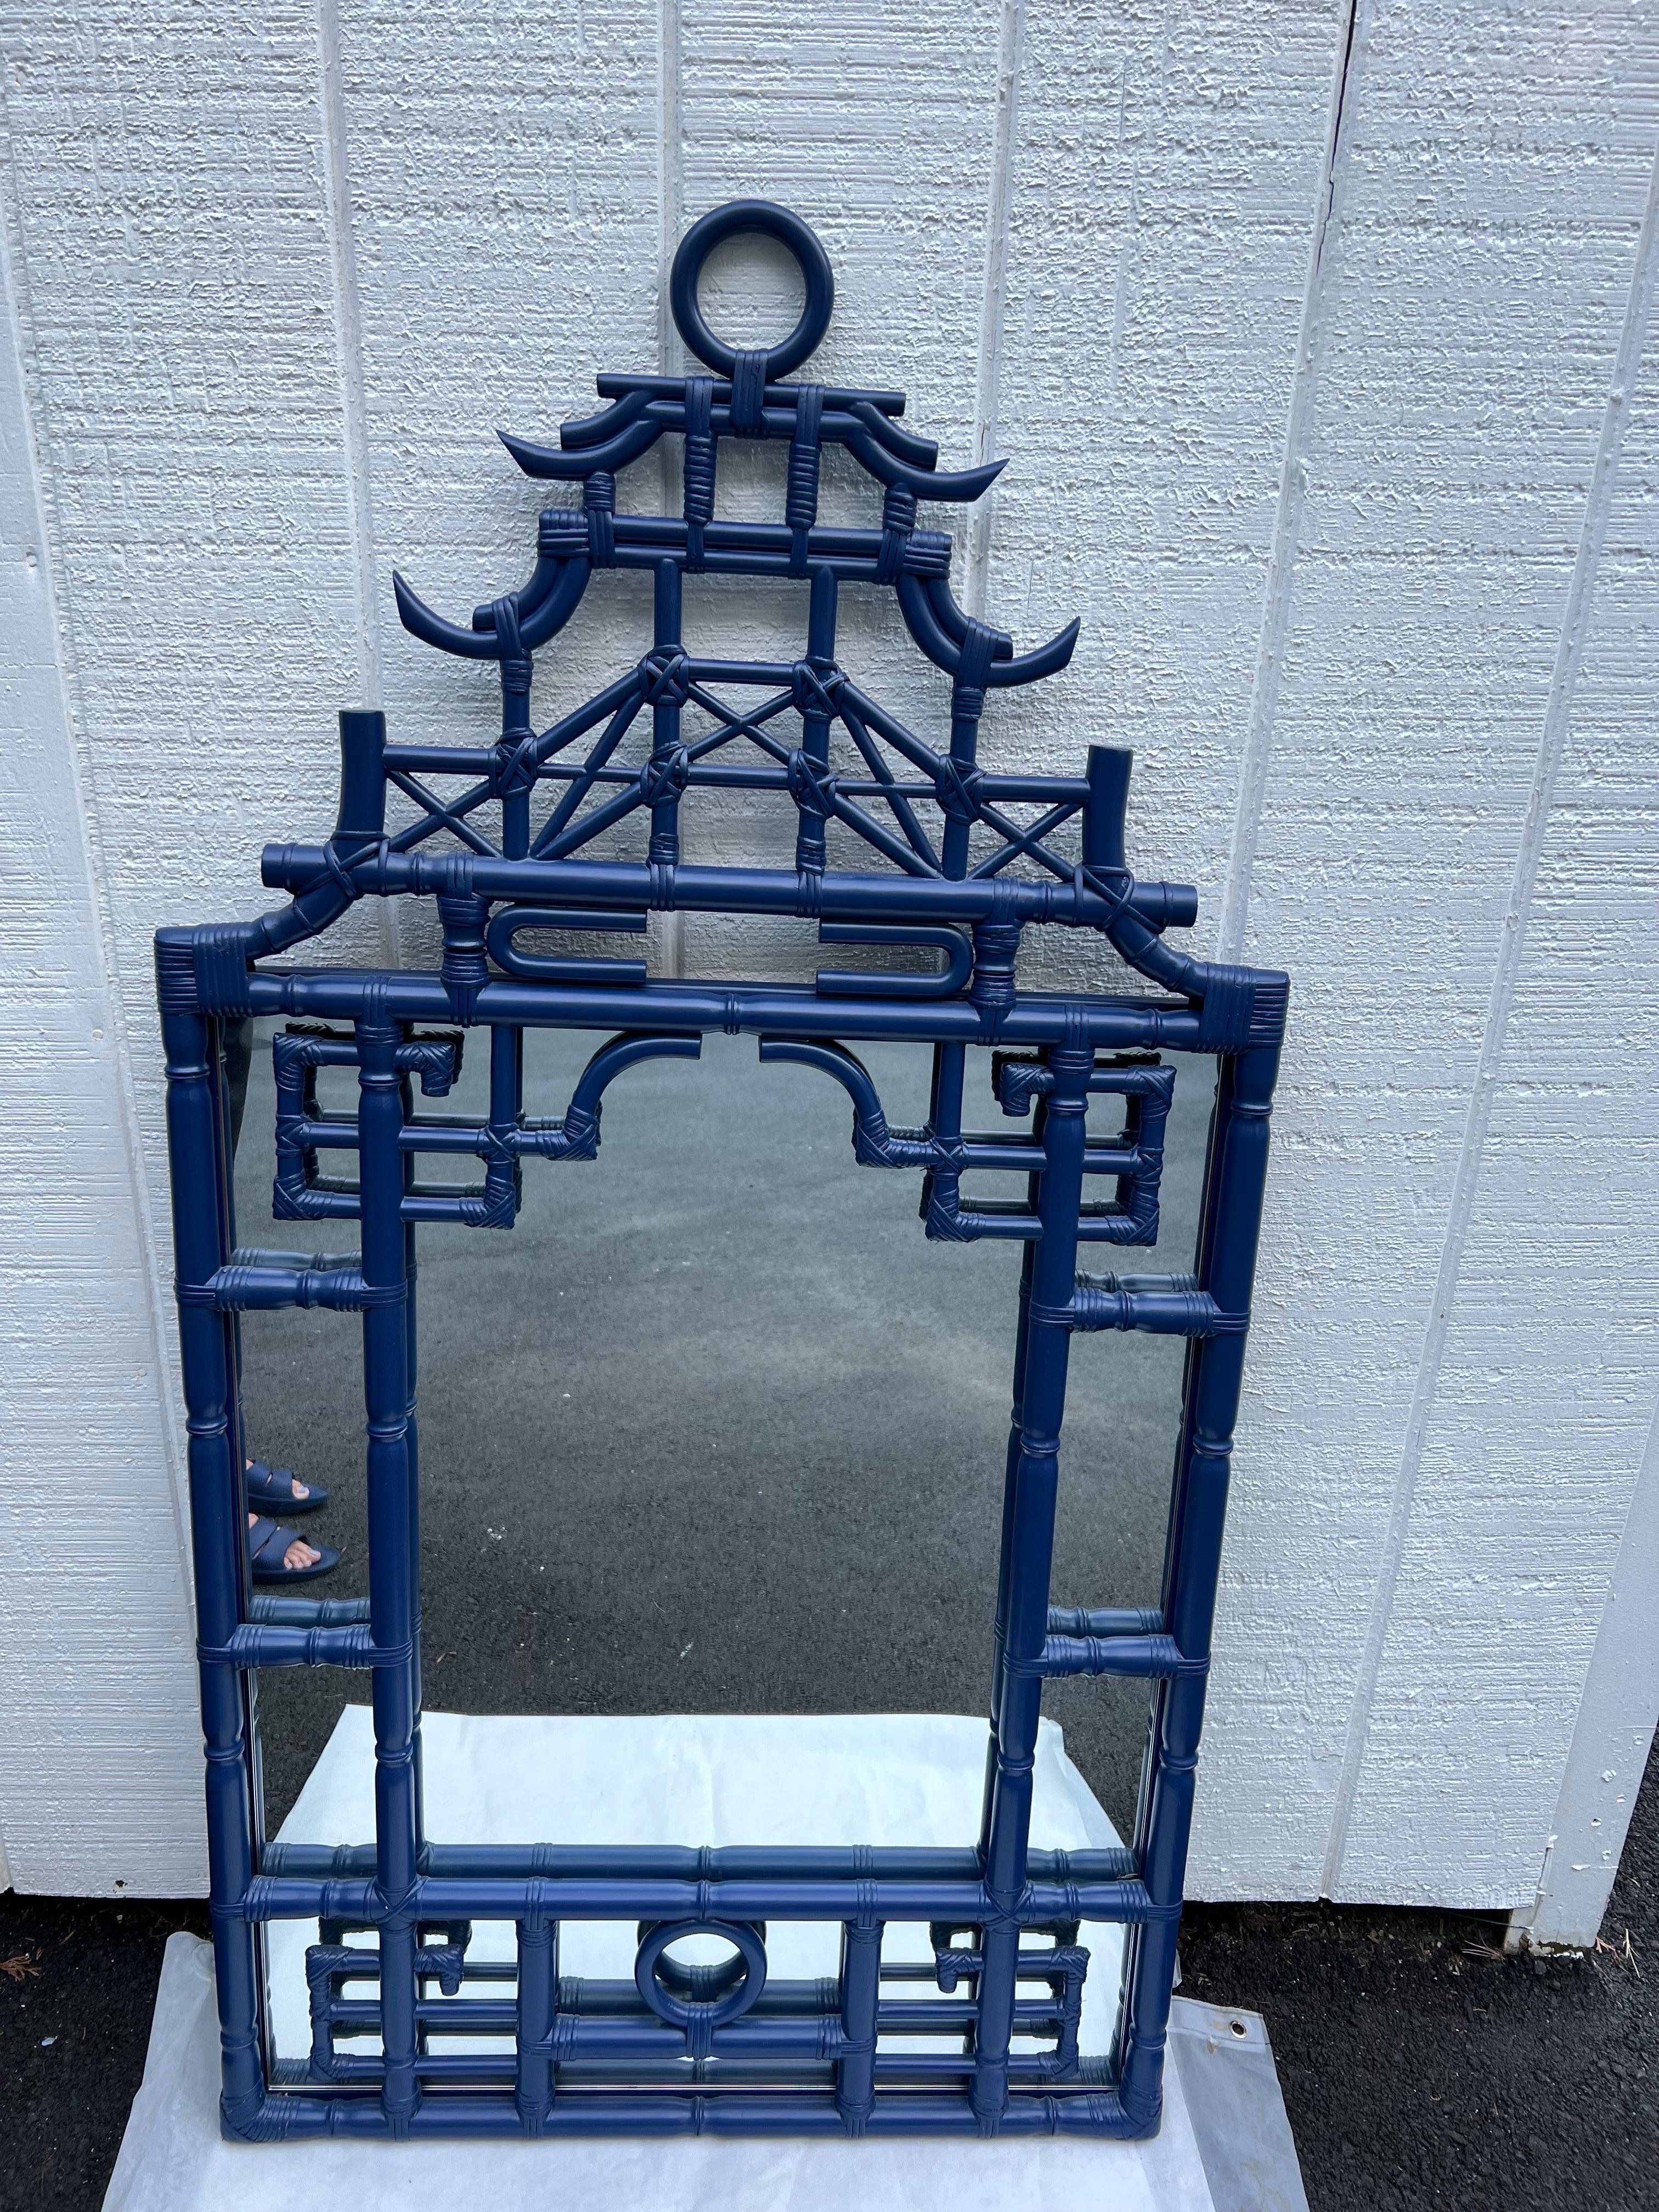 Large Faux Bamboo Pagoda Mirror in Cobalt Blue. This large Palm Beach Style mirror is the ultimate statement piece to embellish any hallway or dining room. Layered tiers of Pagoda roof shapes . This would fit in perfectly at the legendary Colony